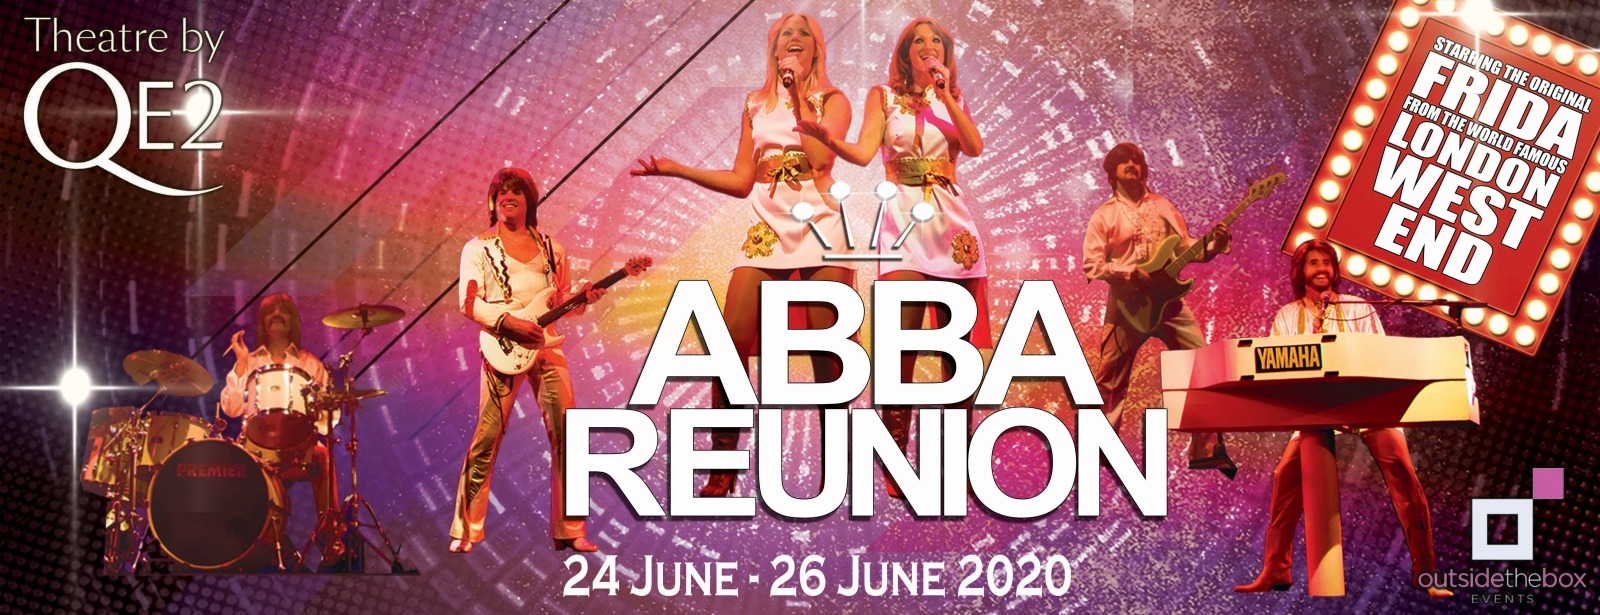 ABBA Reunion at the QE2 - Coming Soon in UAE